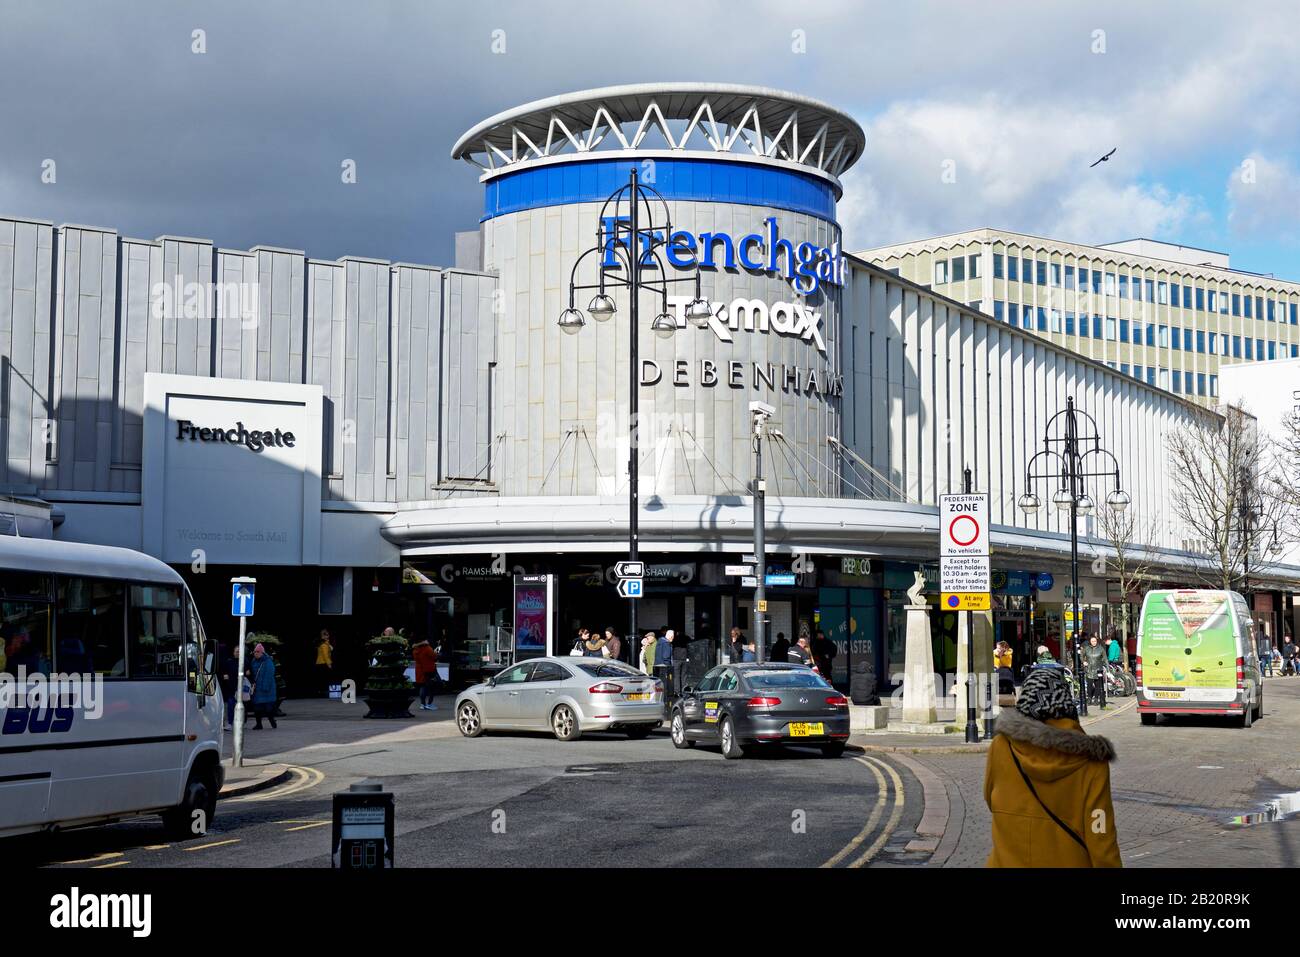 Frenchgate shopping centre, Doncaster, South Yorkshire, England UK Stock Photo